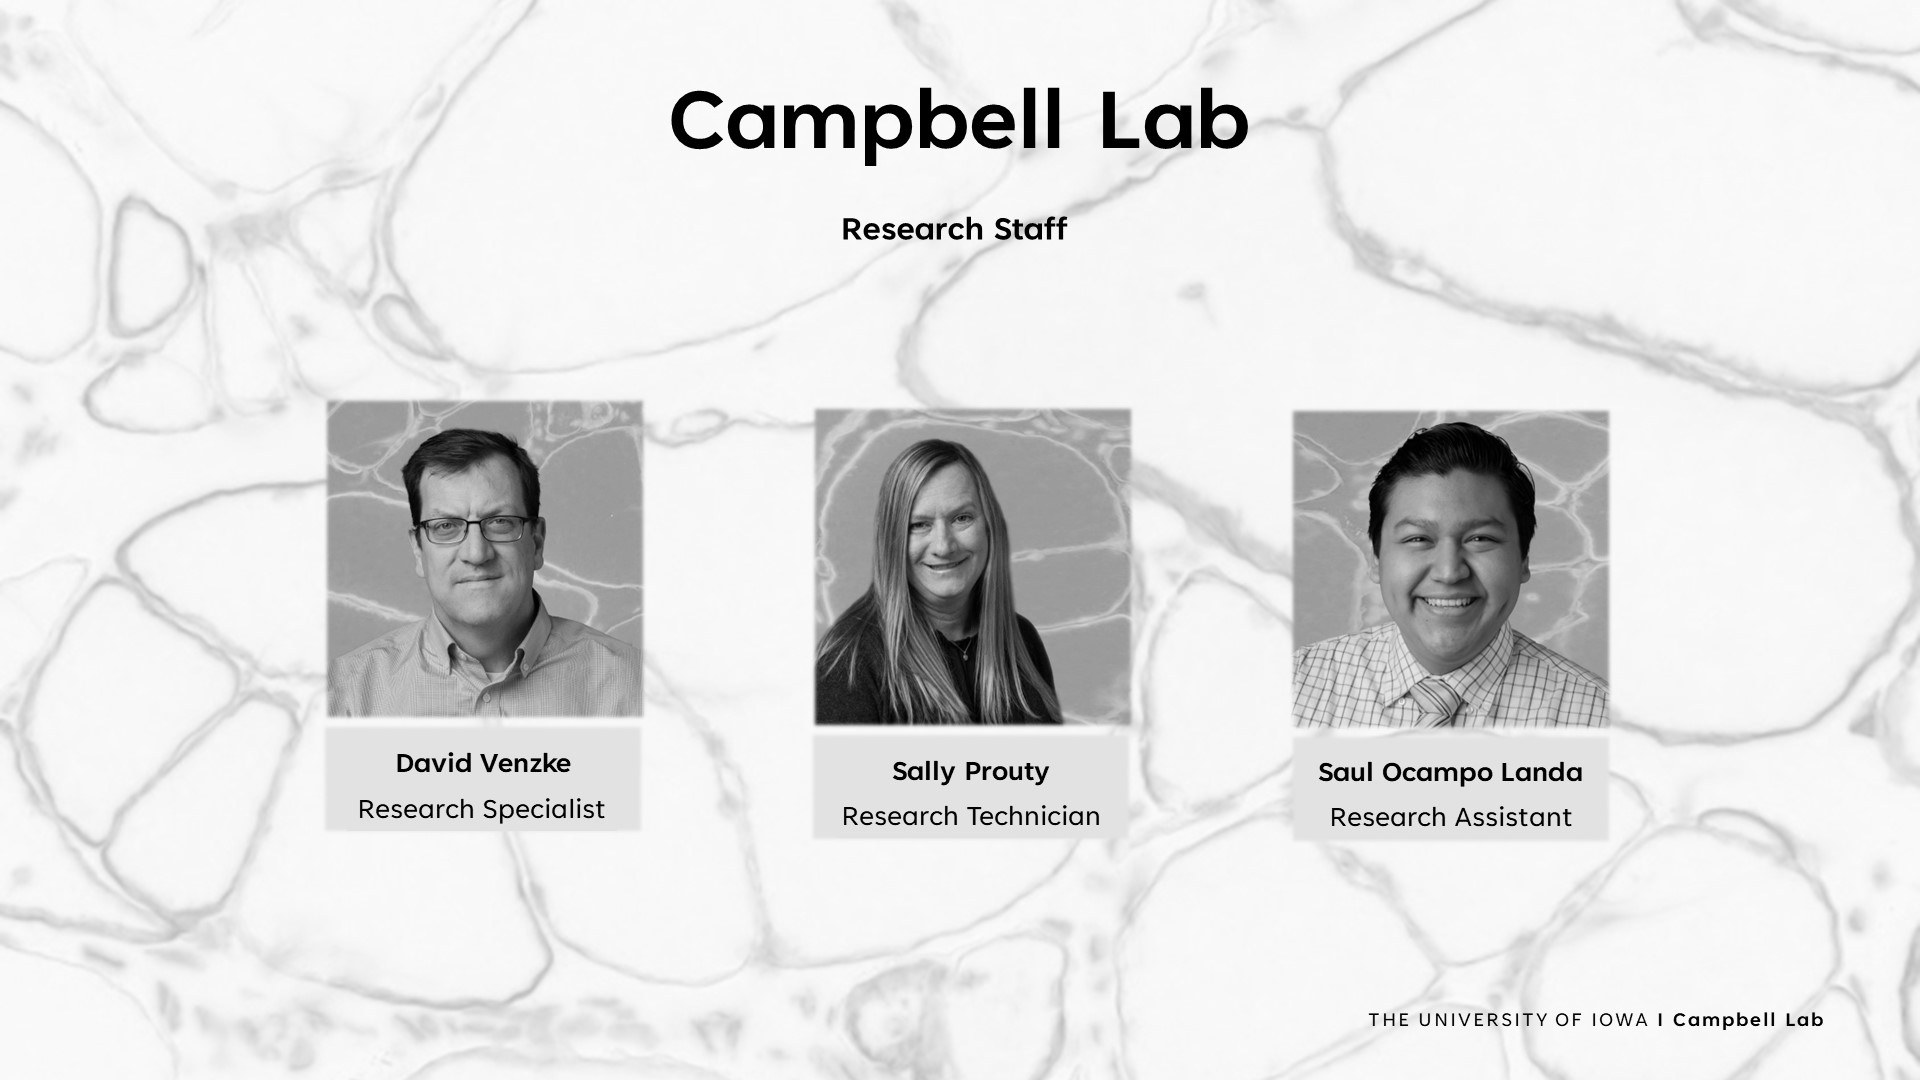 Photos of Campbell Lab Research Staff